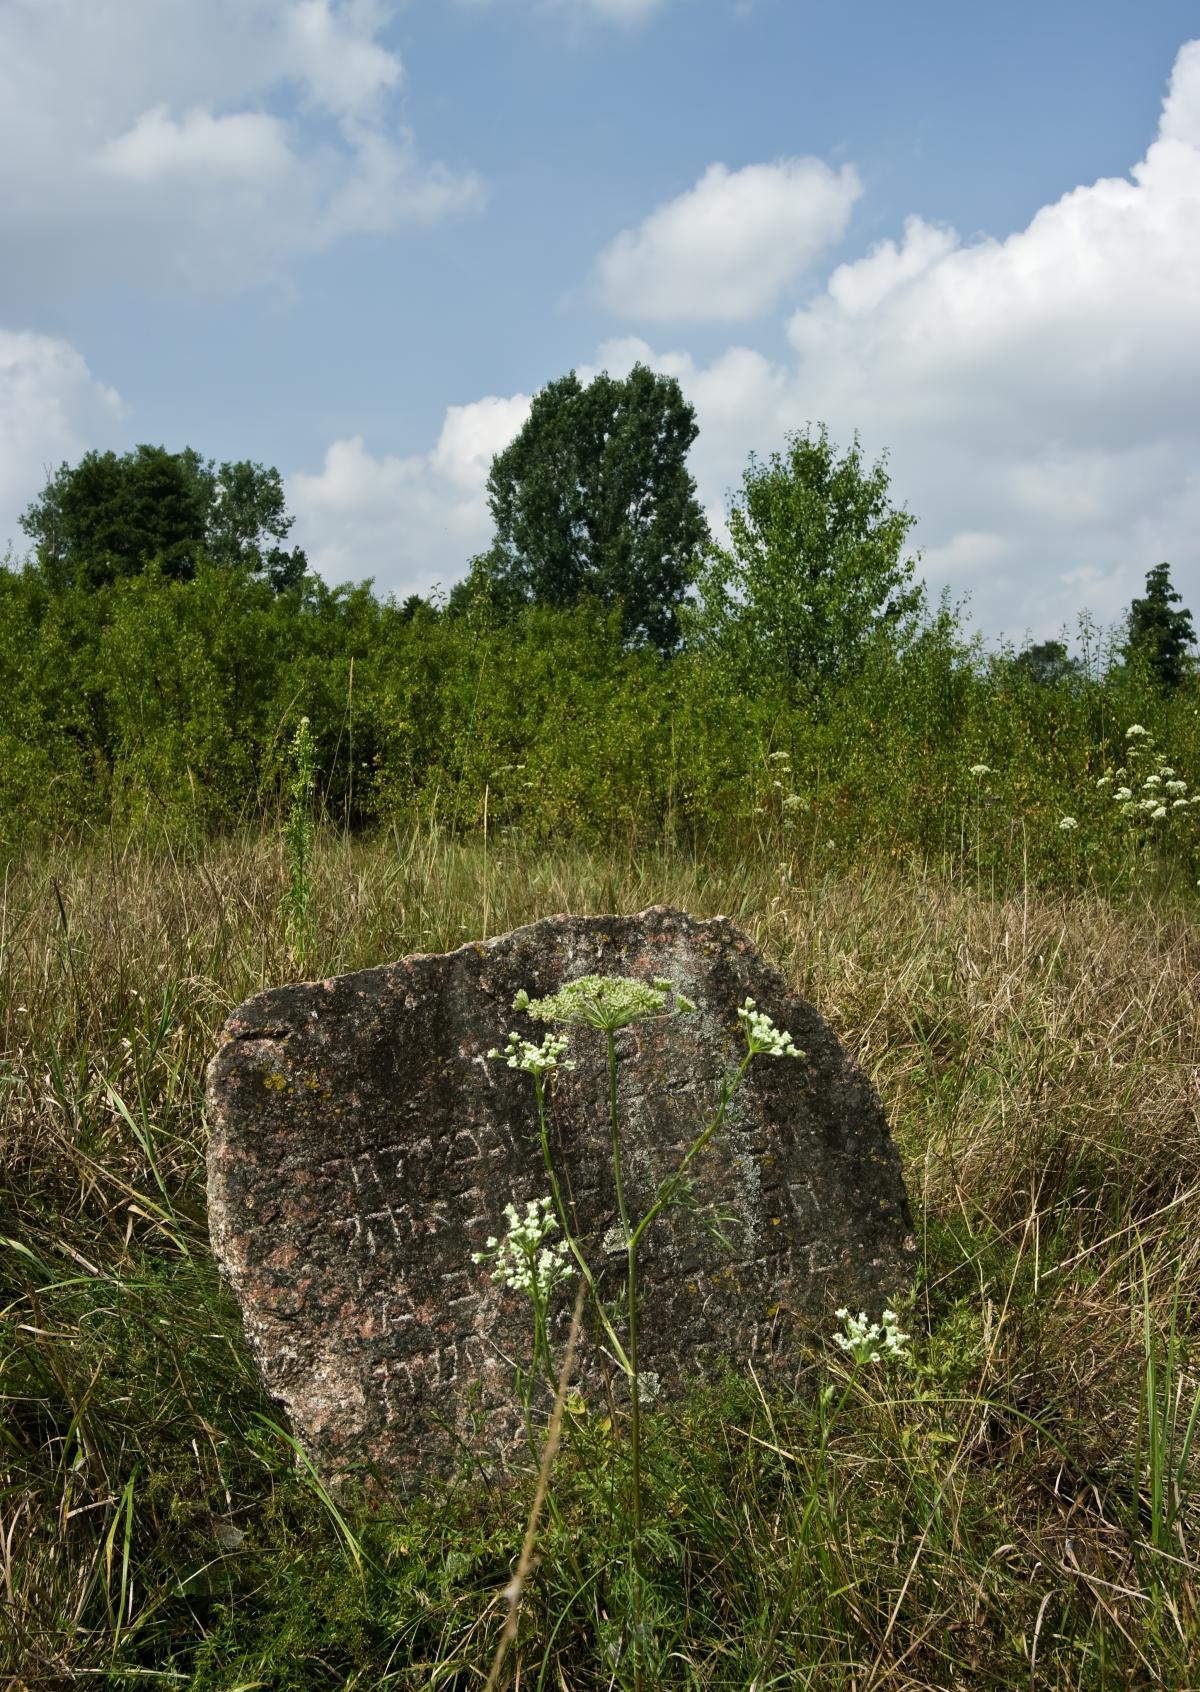 Wikipedia, Jewish cemetery in Bolimw, Media with locations, Pages with maps, Quality images, Self-p